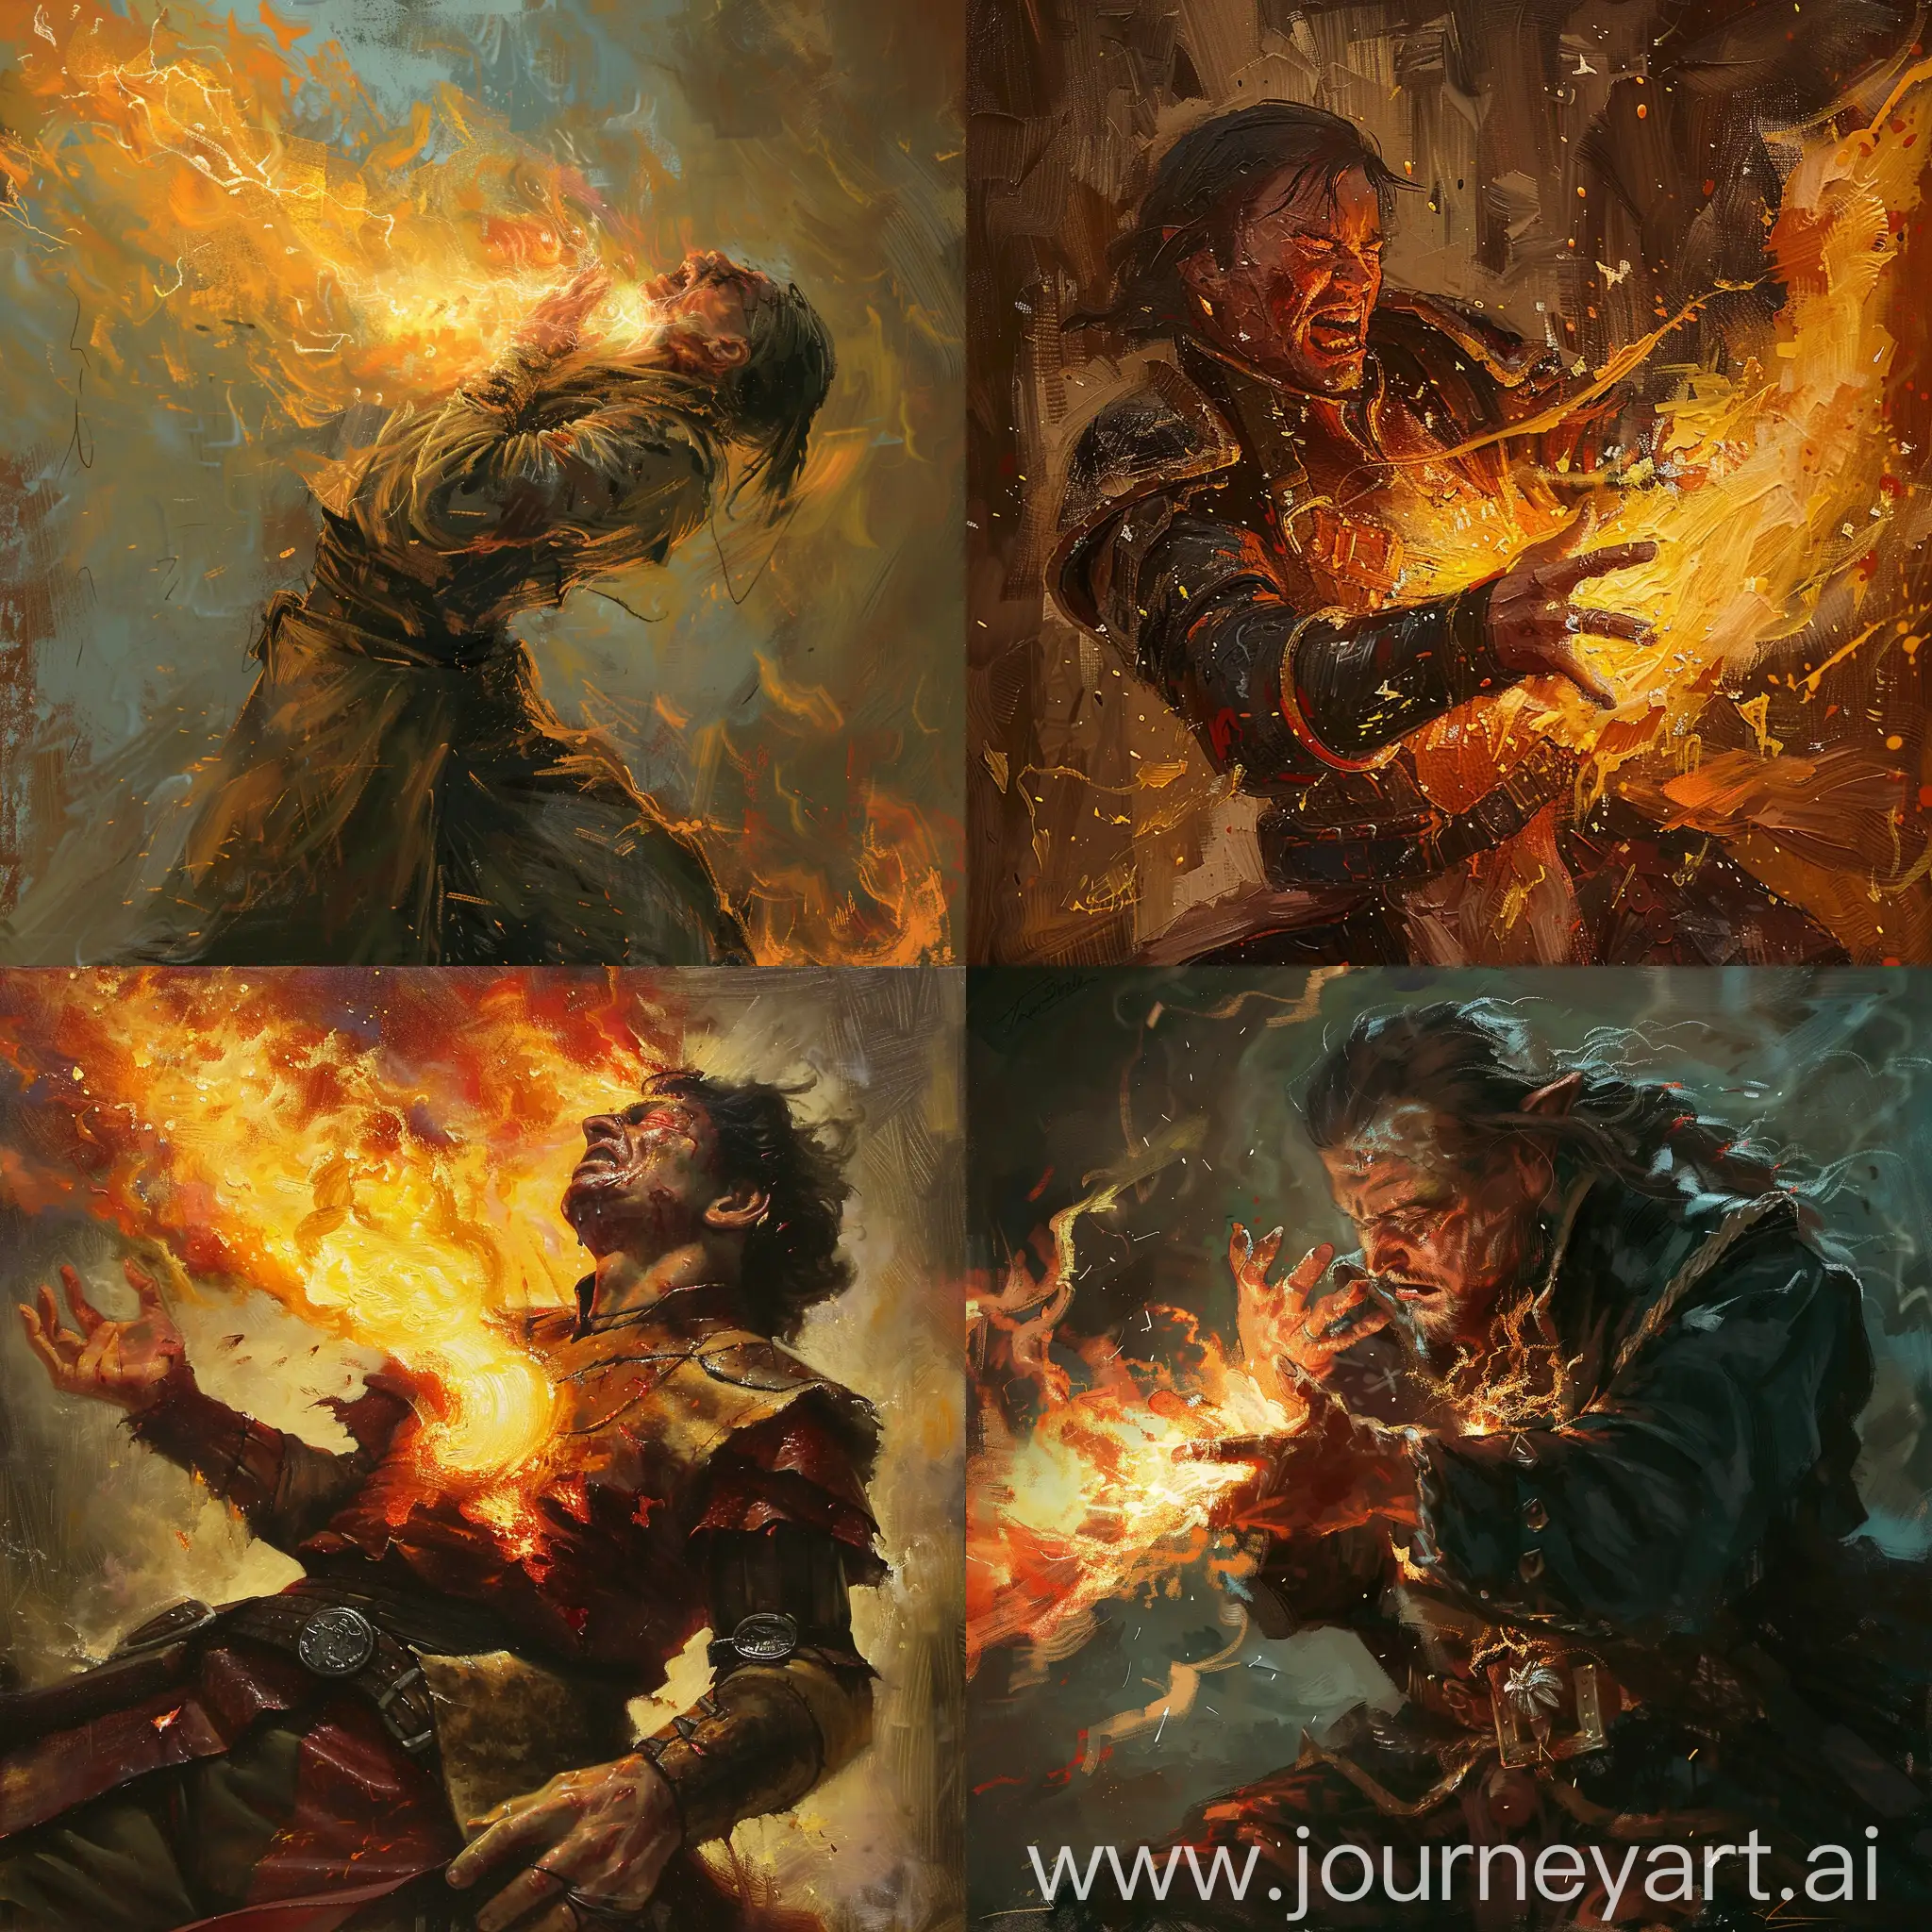 Battlemage in pain, as they use fire magic to cauterize a wound.
In the art style of Terese Nielsen oil painting